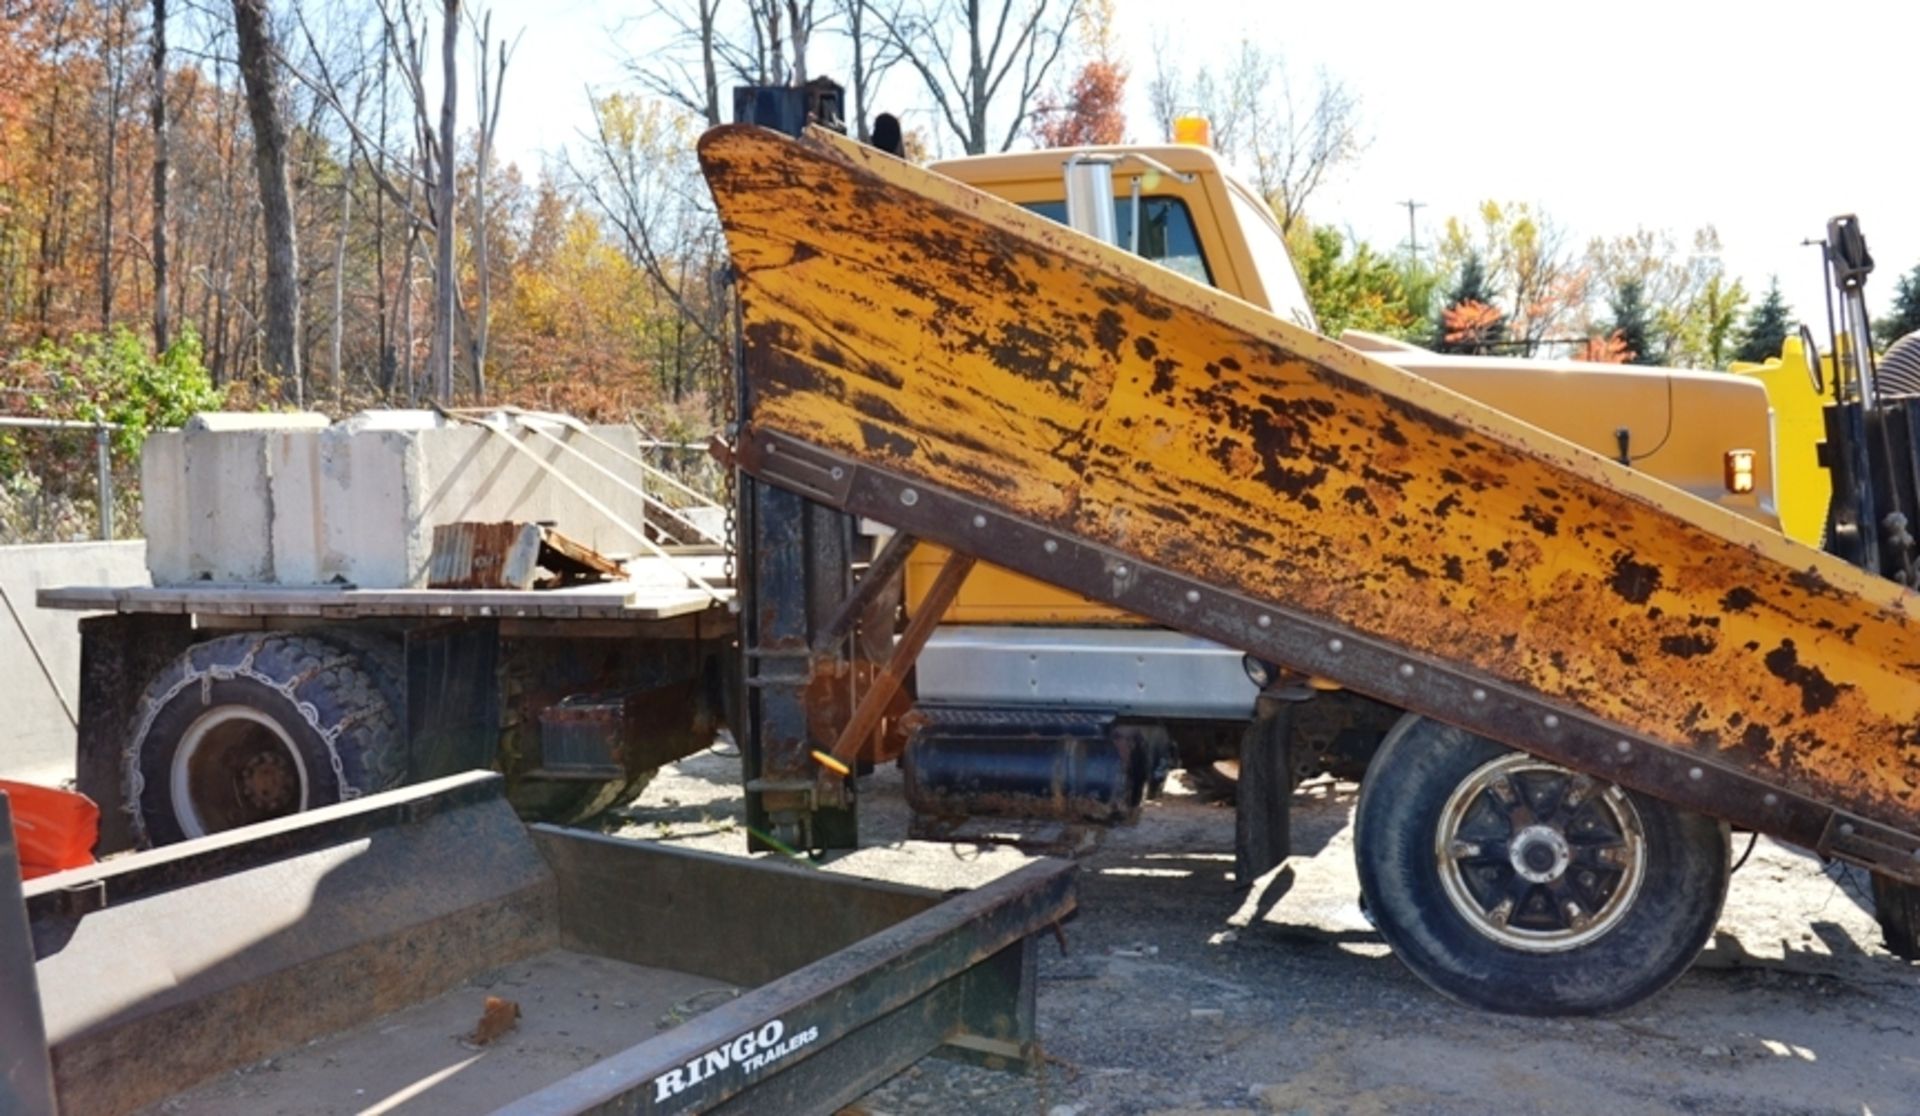 1988 INTERNATIONAL S2500 FLATBED W/ PLOW - Image 2 of 2